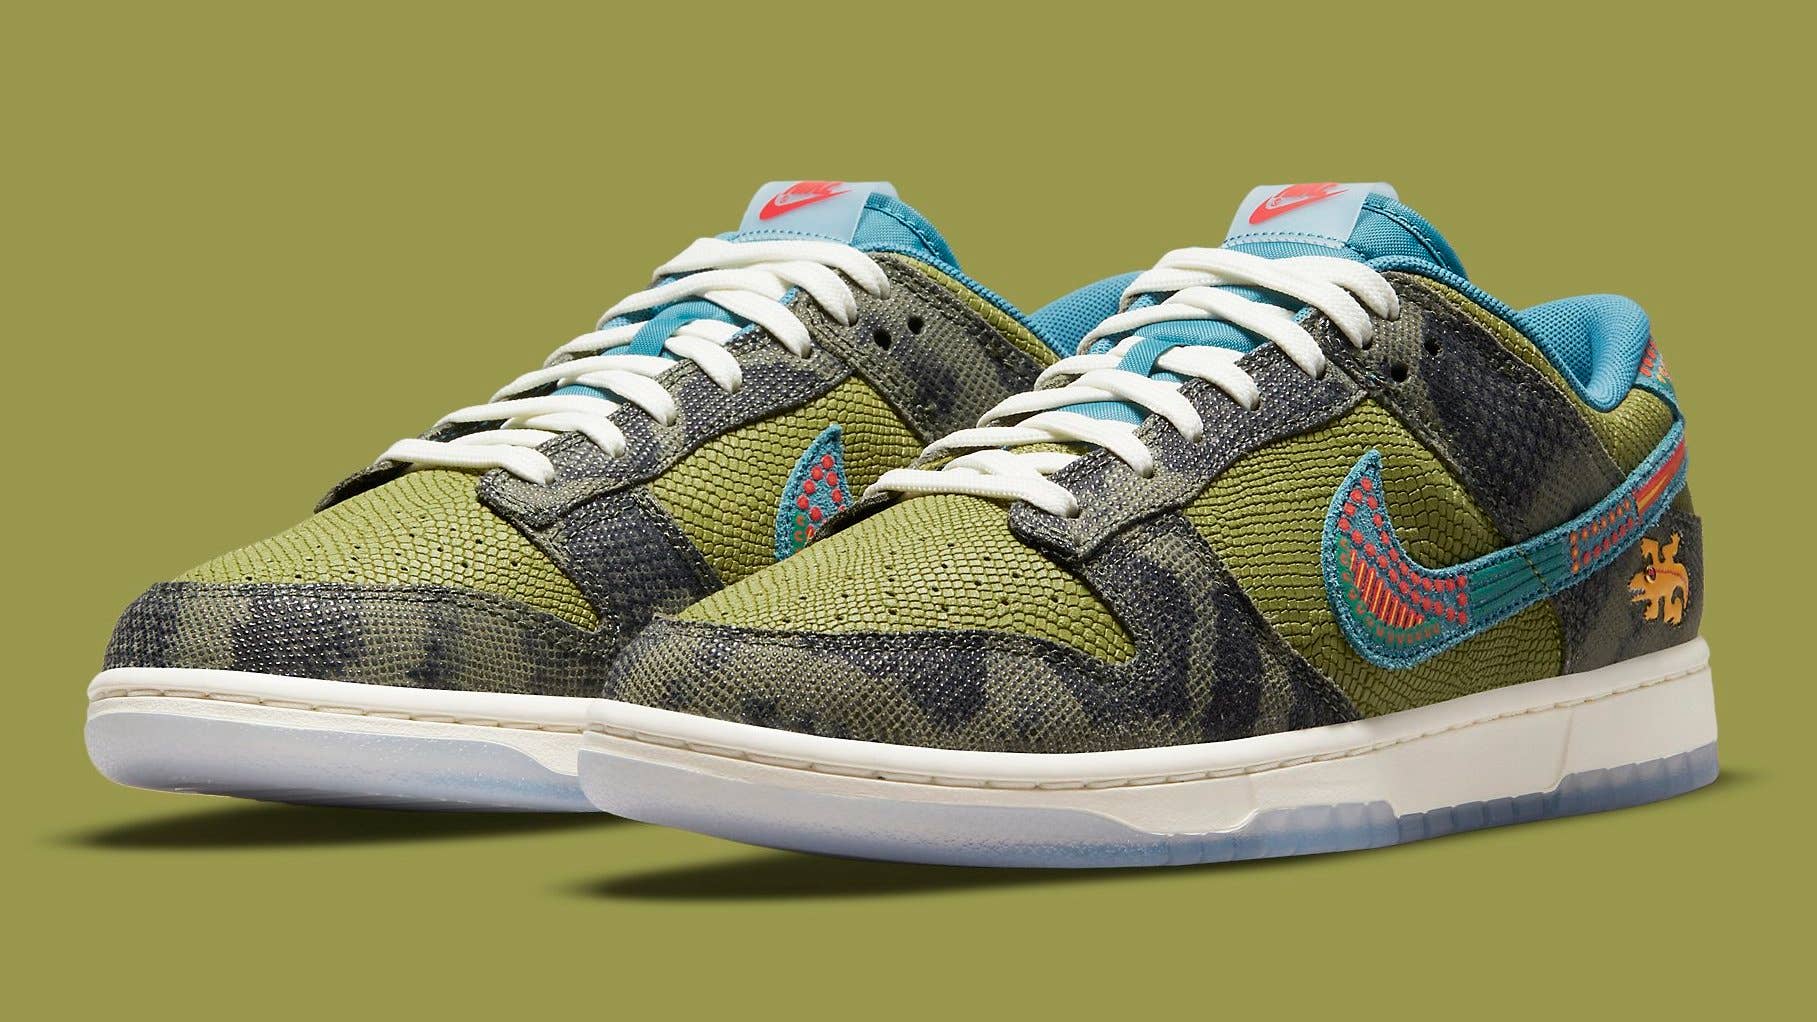 Nike Confirms Release of Limited Edition Grateful Dead Sneaker Collaboration